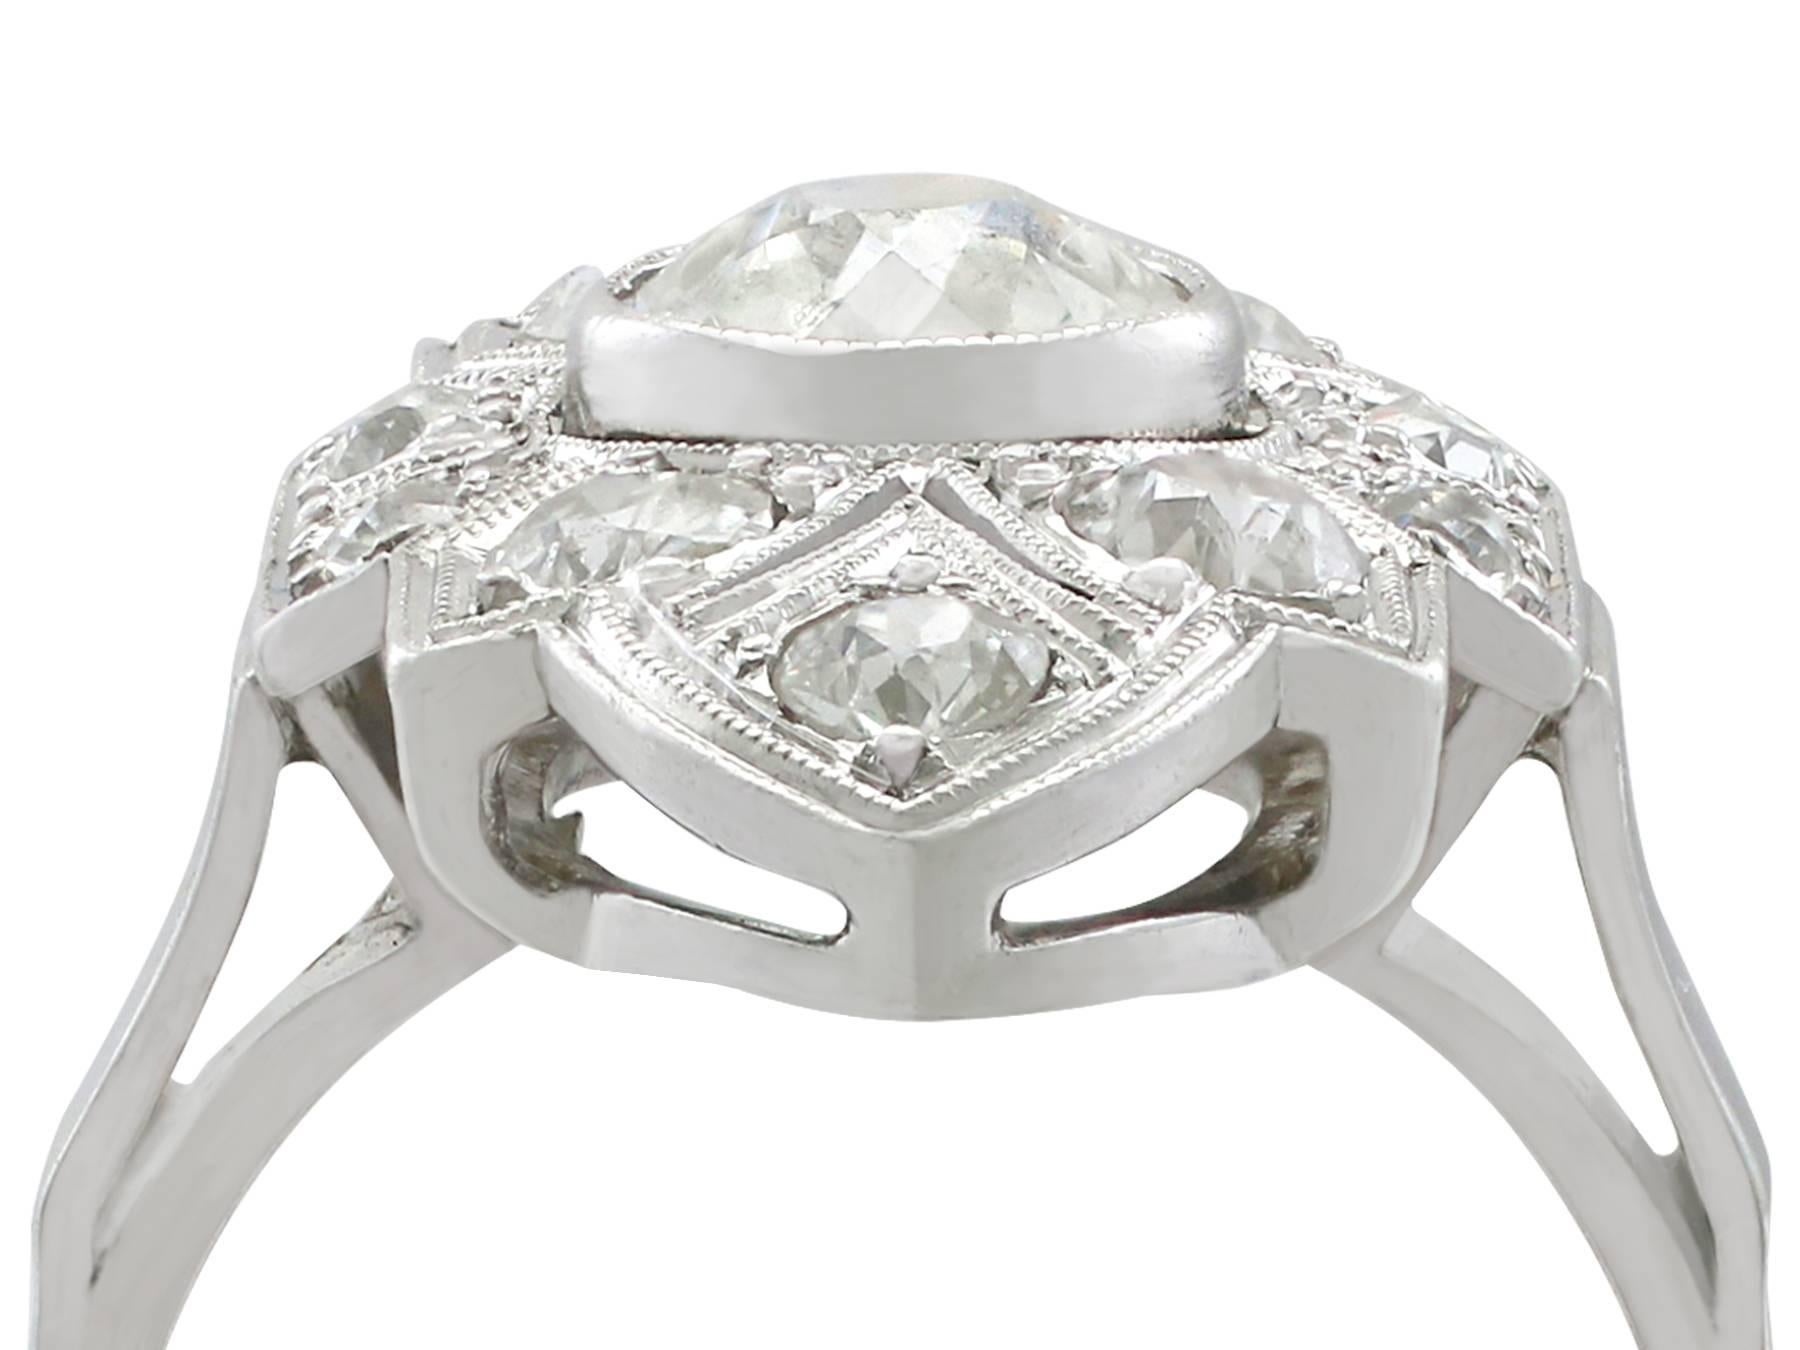 An impressive vintage Art Deco 1.91 Ct diamond and 14k white gold, platinum set marquise shaped dress ring; part of our diverse diamond jewelry collections.

This fine and impressive Art Deco white gold and diamond ring has been crafted in 14 Ct